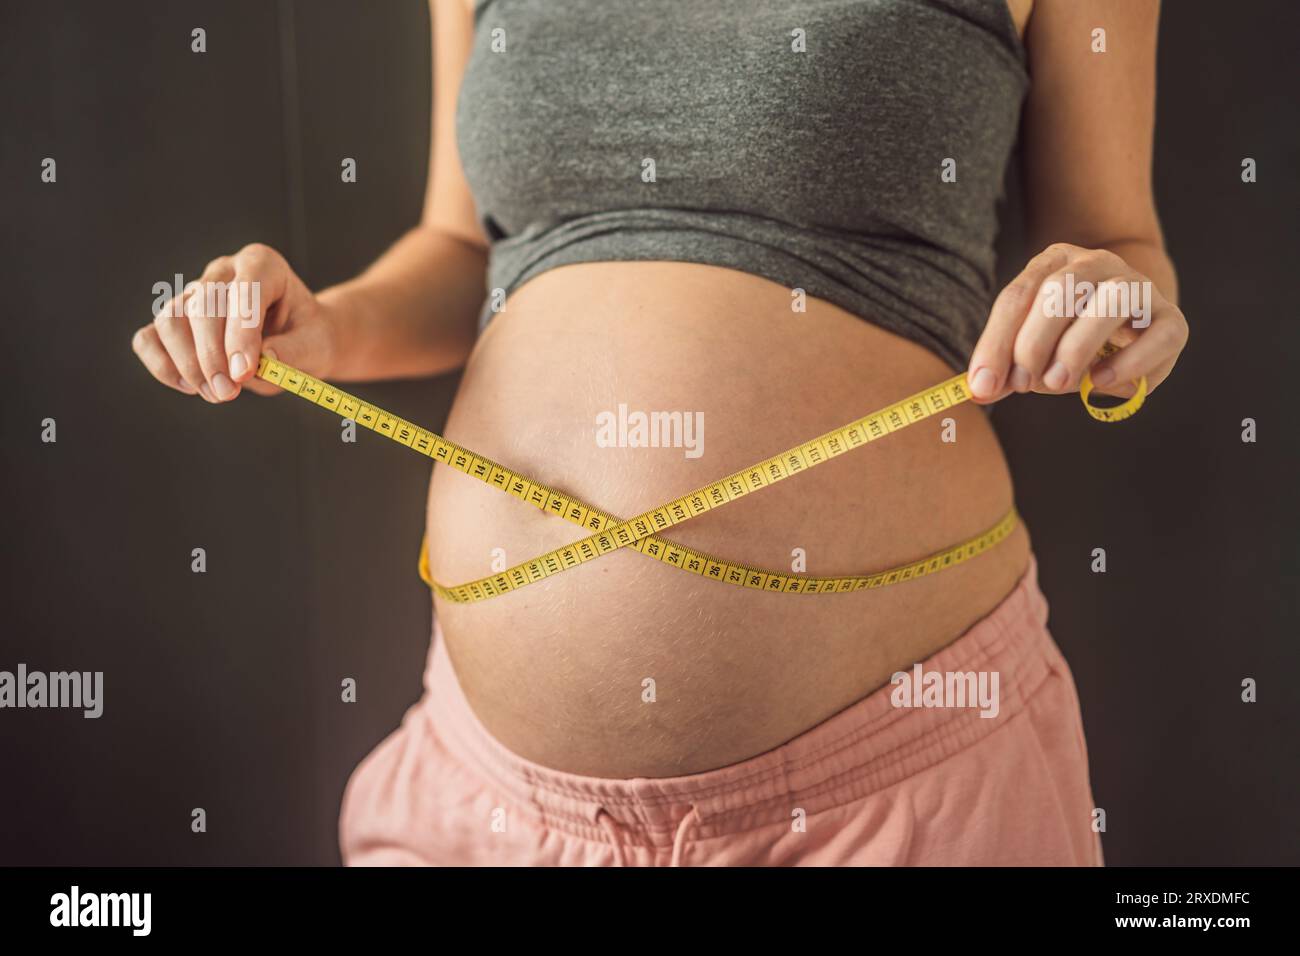 Slim young woman measuring her thin waist with a tape measure, close up  Stock Photo - Alamy